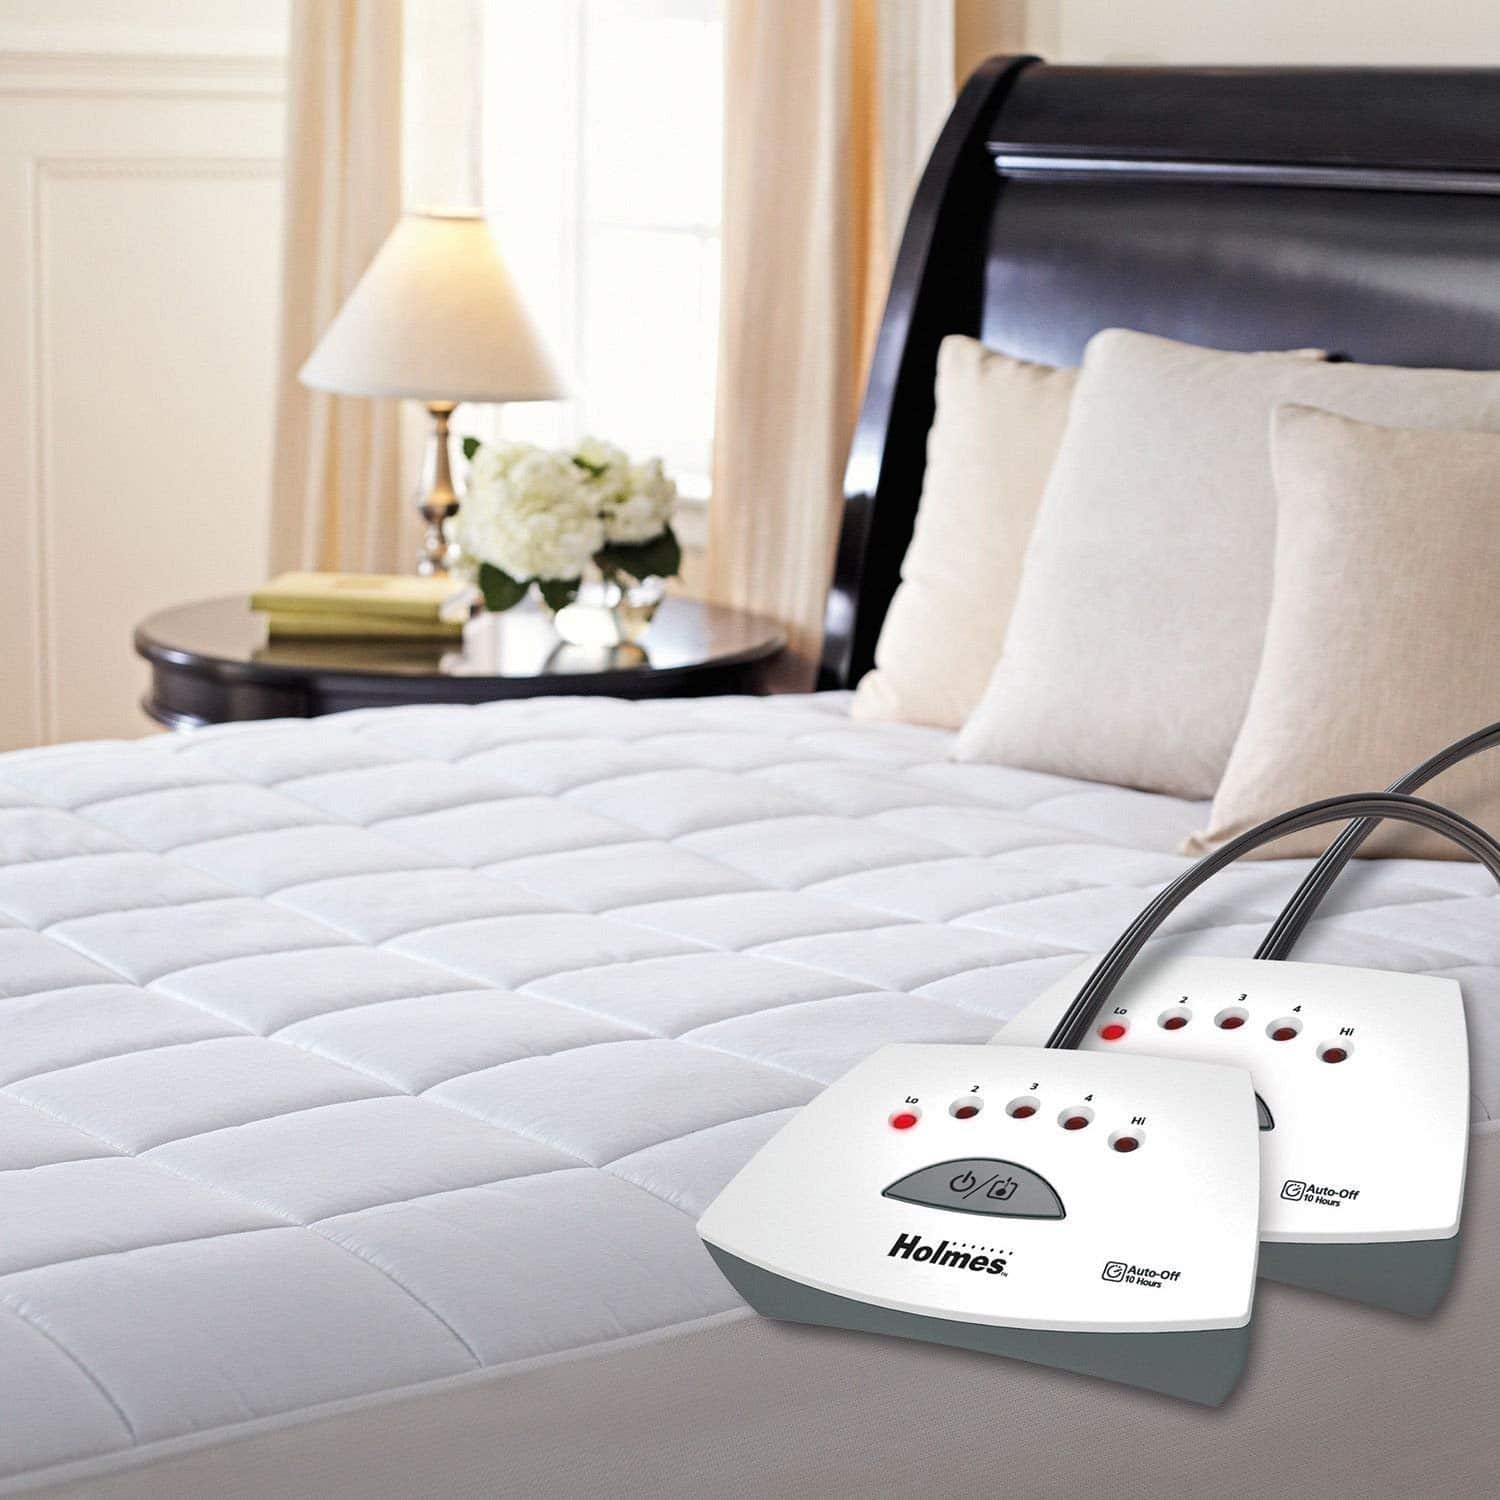 Top 10 Best Electric Mattress Pads in 2022 Reviews Buyer's Guide